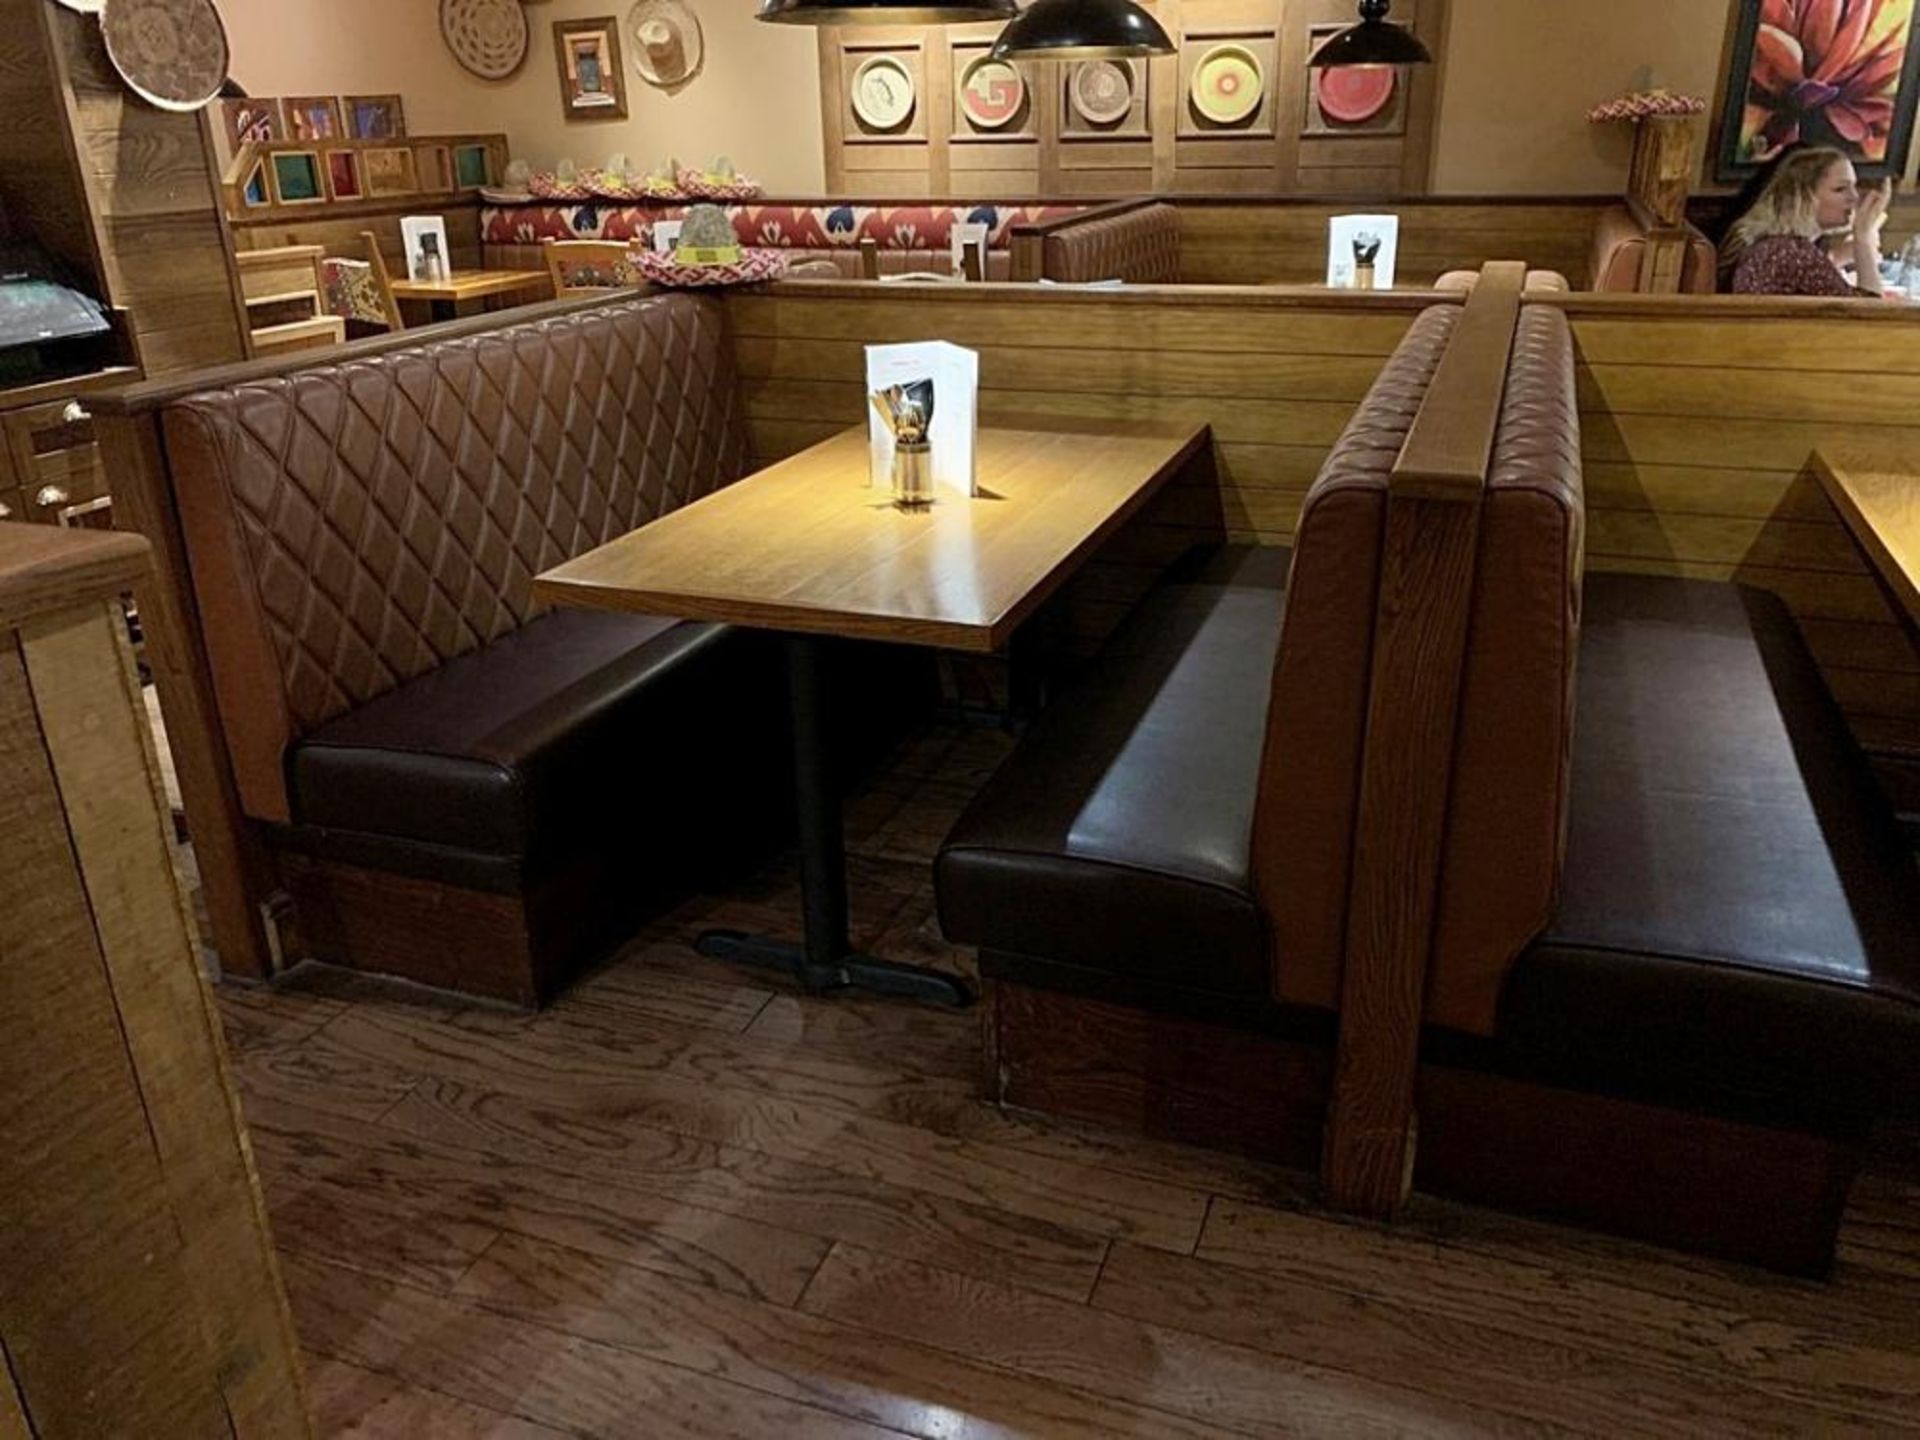 4 x Sections Of Upholstered Restaurant Booth Seating - Single And Double-Sided - CL339 - From a Popu - Image 4 of 4